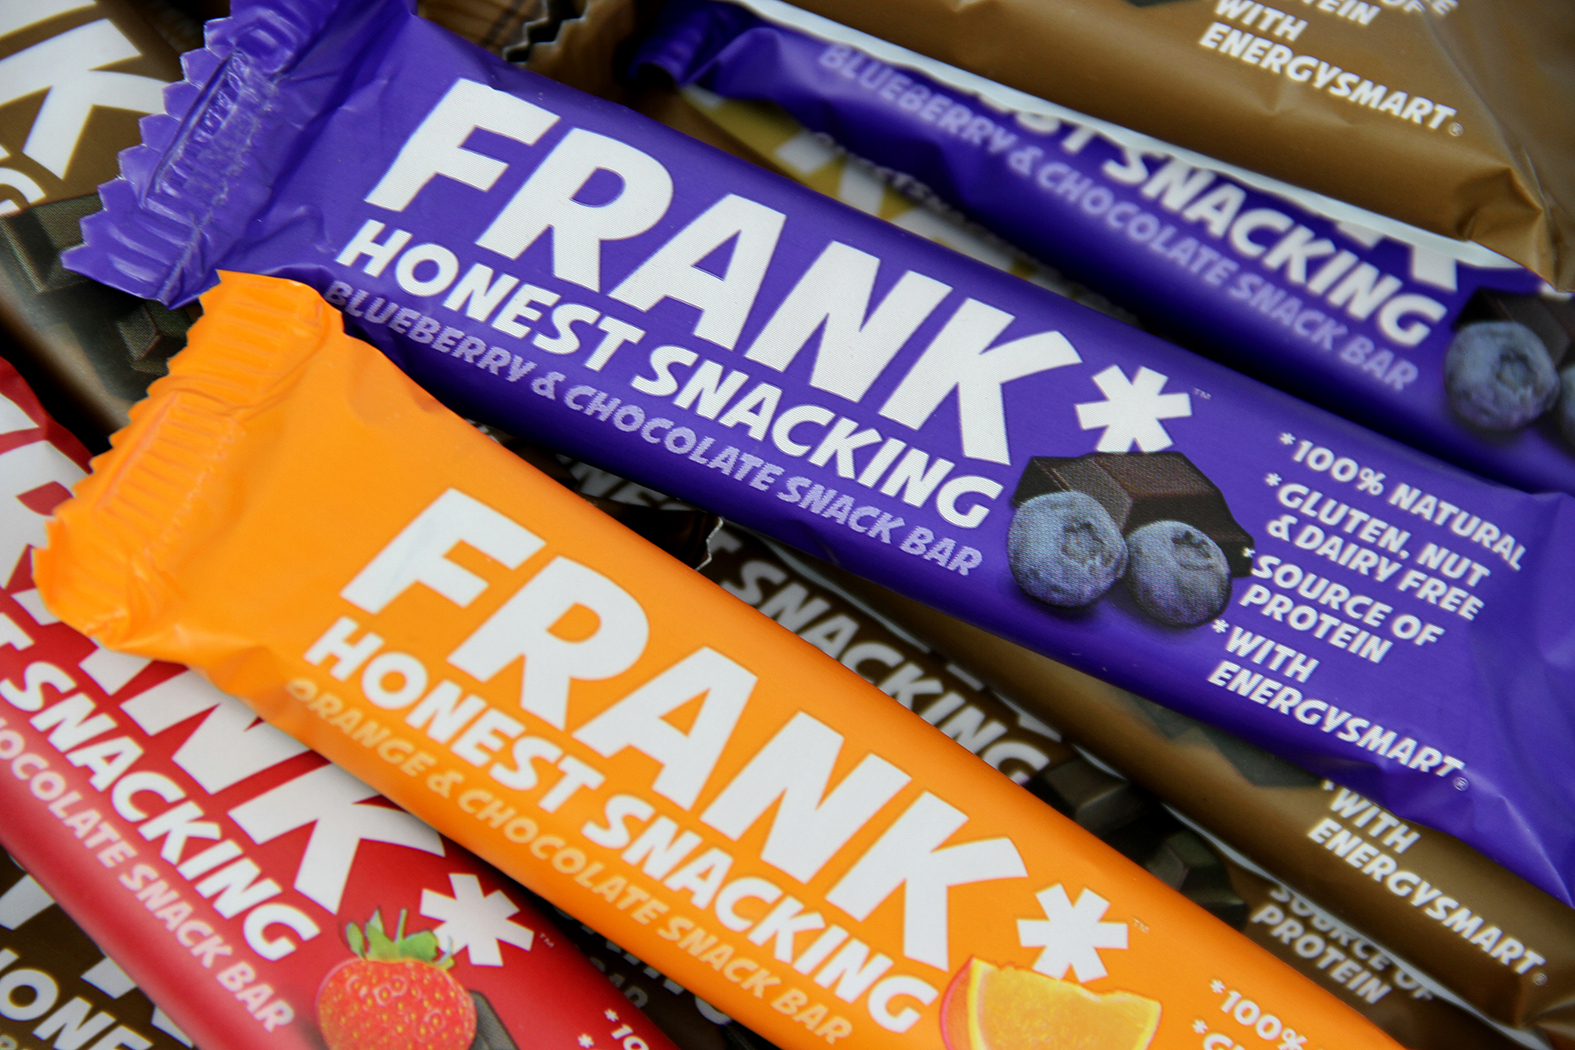 Cereal Bar Targets Free From Nutrition And Energy Sectors Says The Frank Food Company MD 